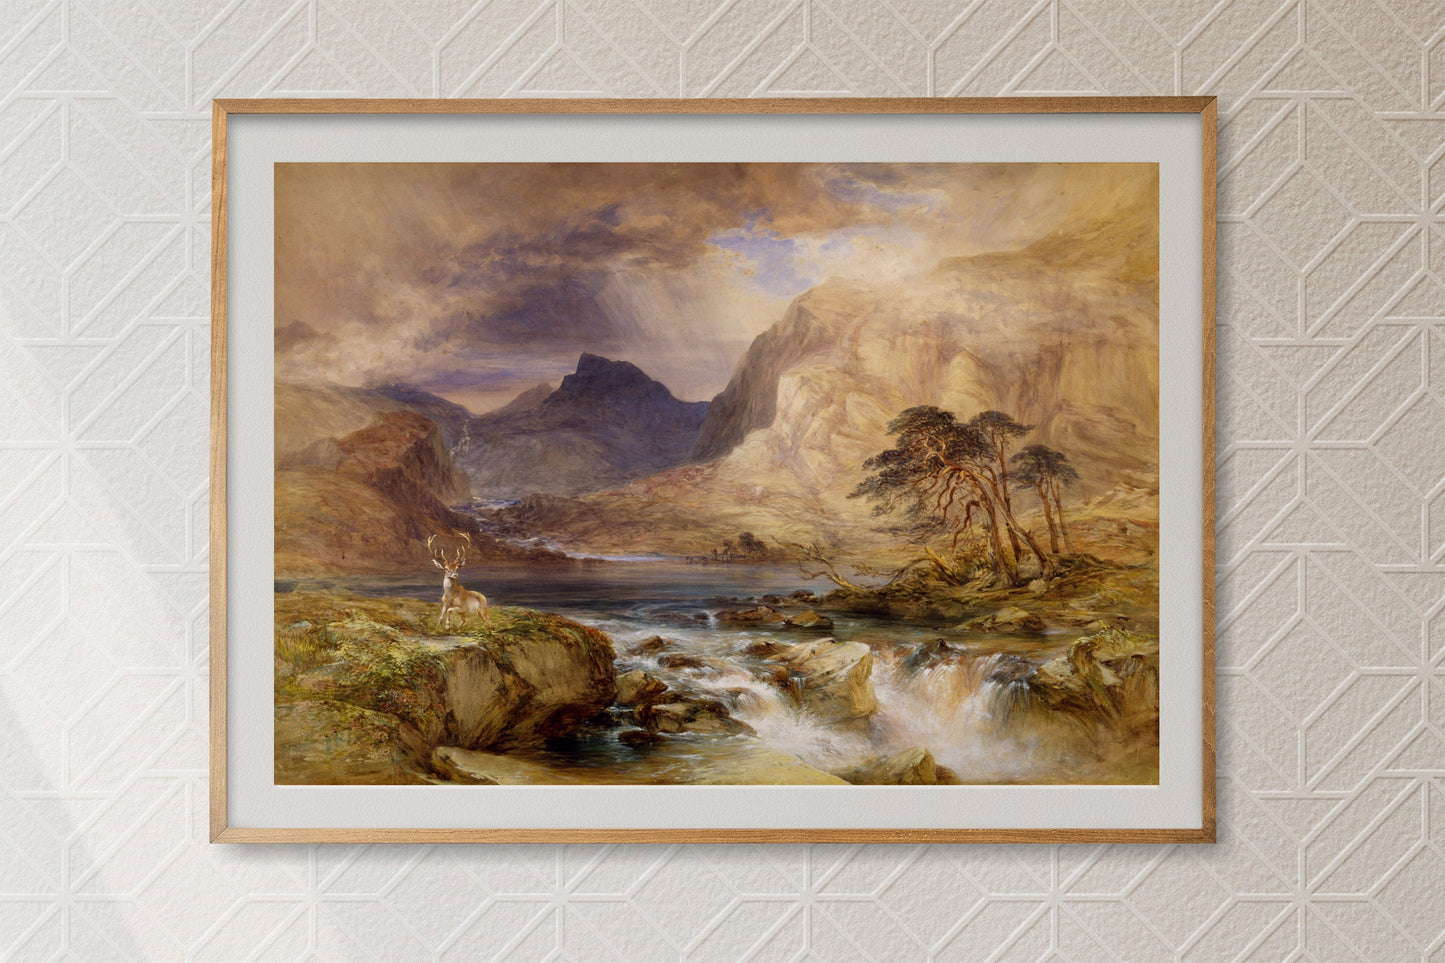 Beautiful Illustration Brodick Isle Of Arran Scotland 1849-1851 by William Andrews Nesfield Painting Print Poster Wall Hanging Decor